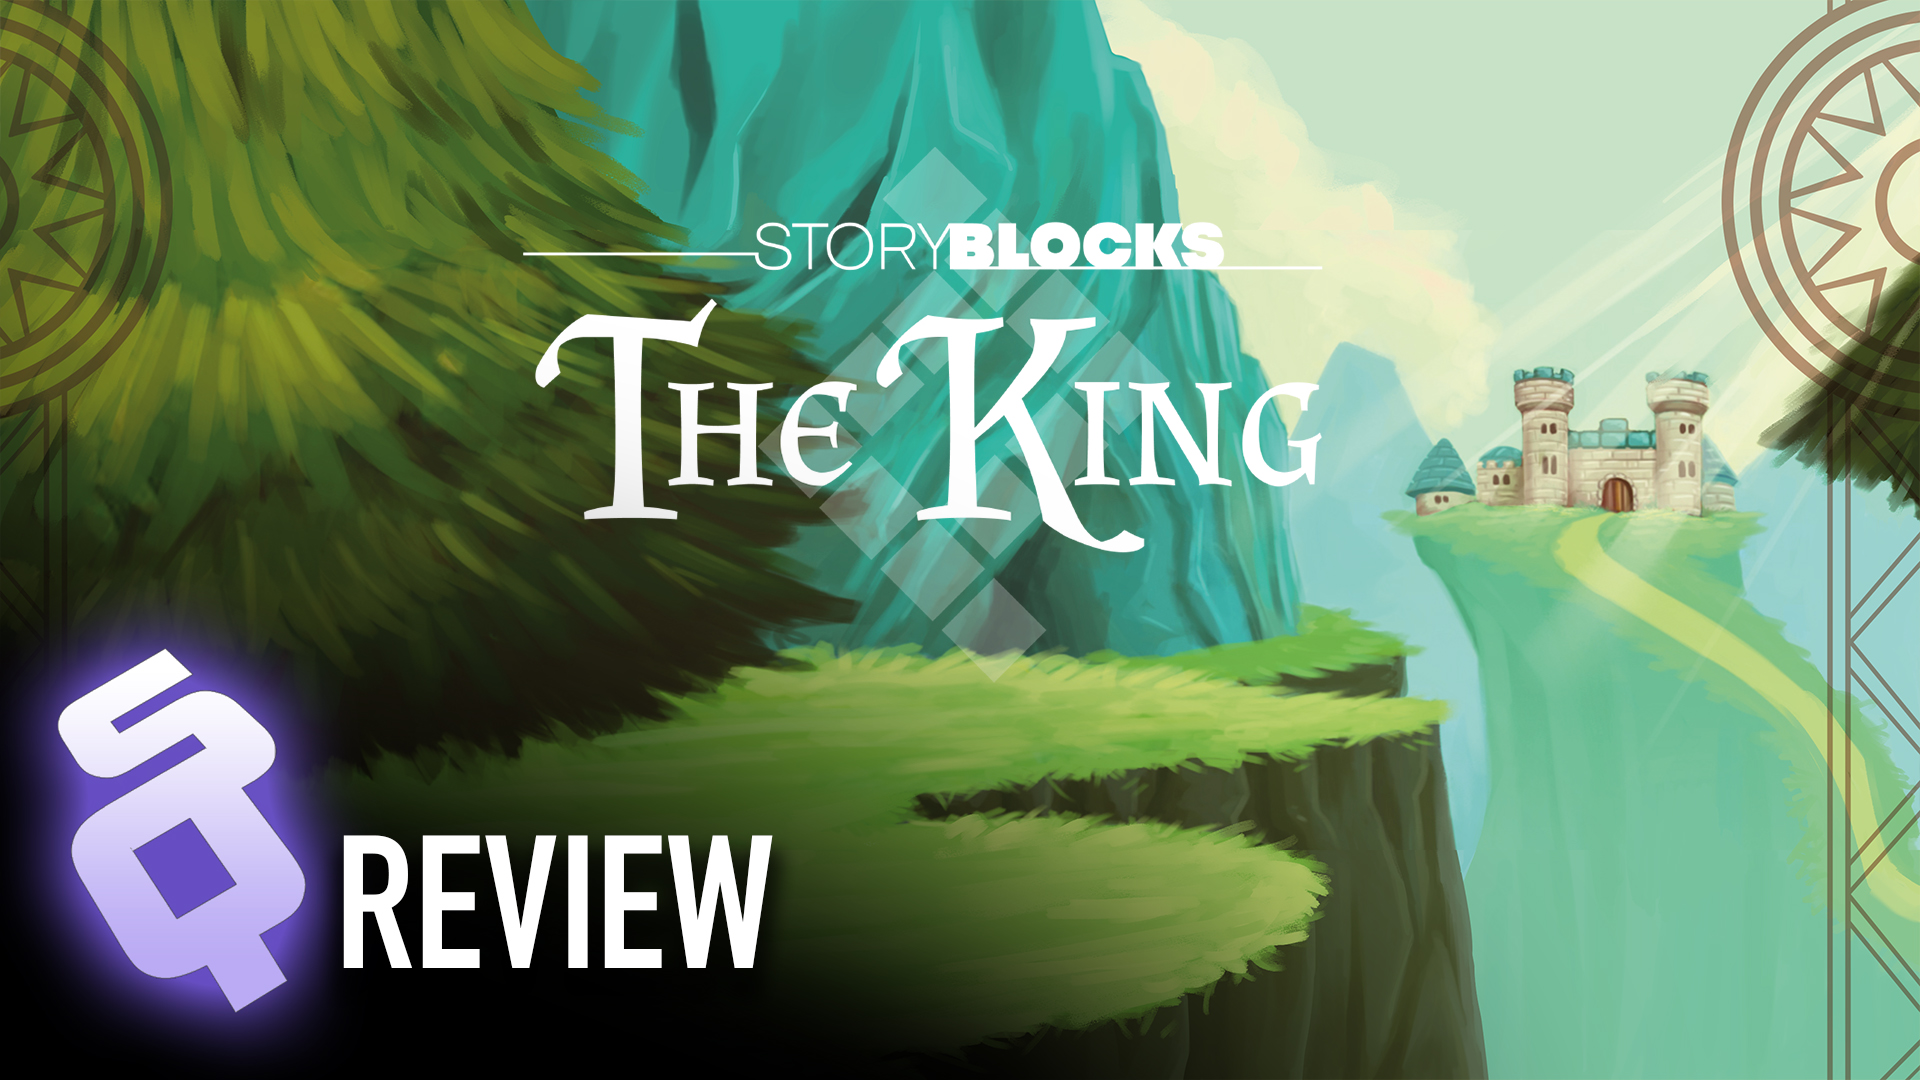 Storyblocks: The King review